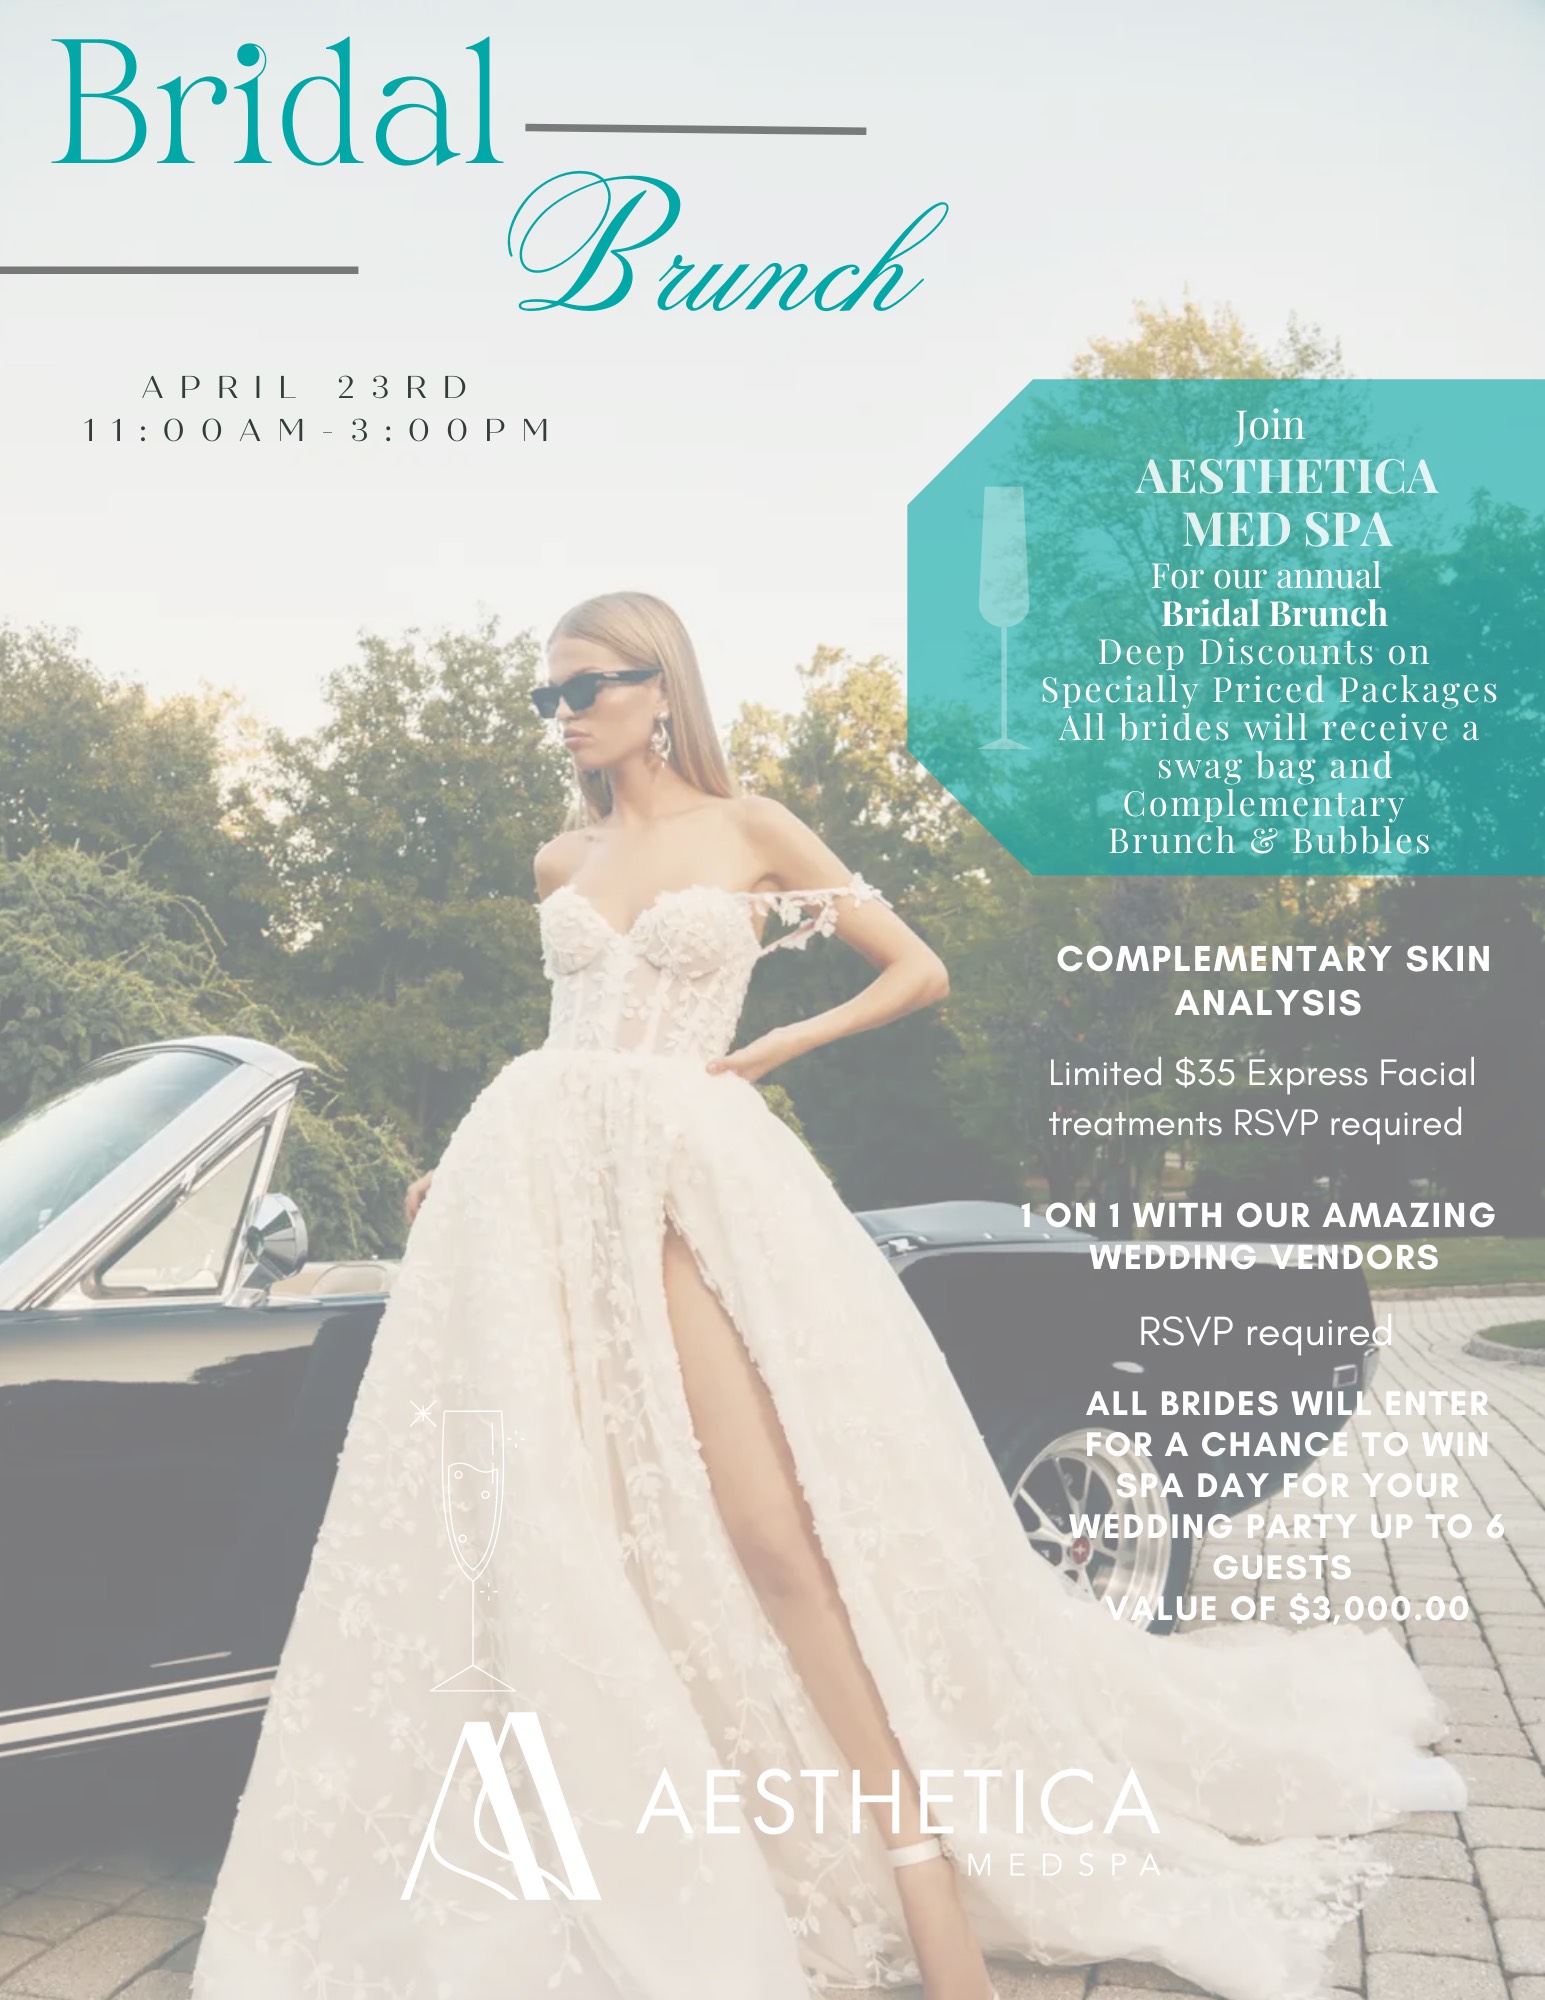 Attend the Bridal Brunch Event